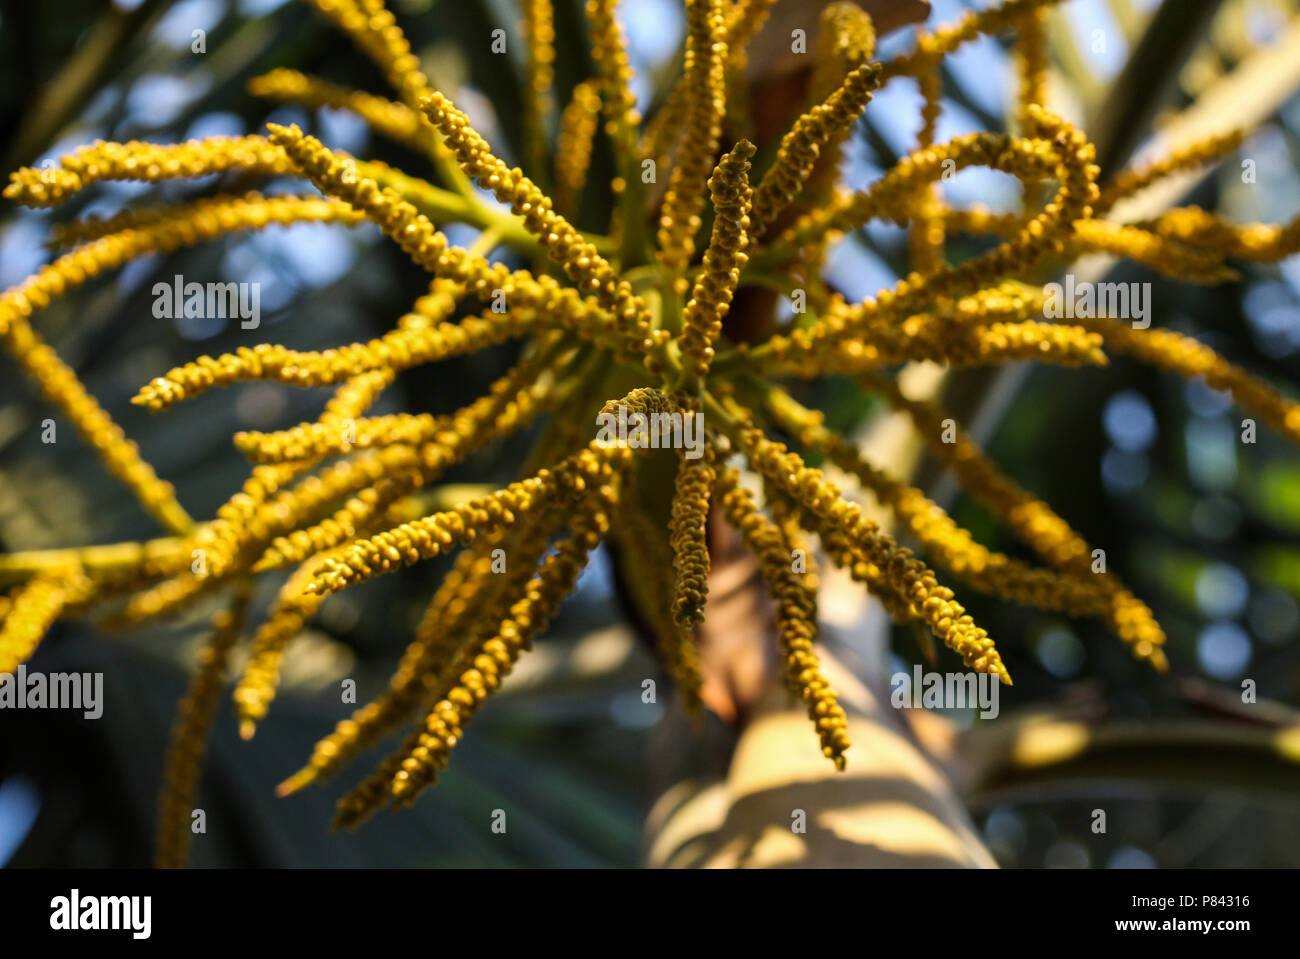 Flowering of palm tree, plant of the family Arecaceae, also known as Palmae. Stock Photo